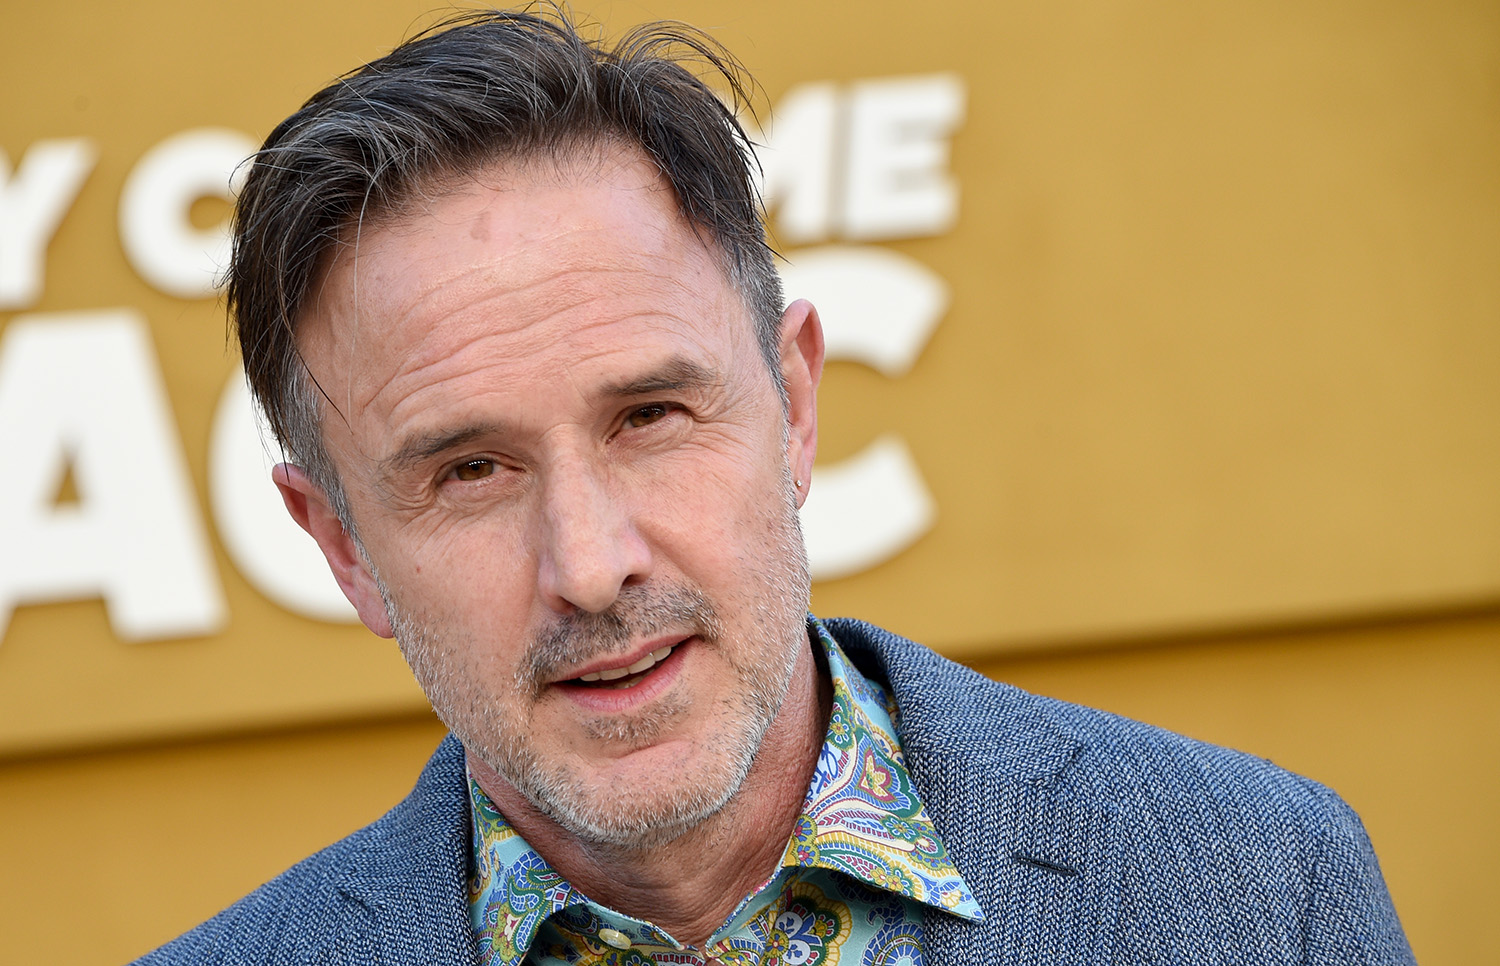 The Quarry and Scream star David Arquette attends the premiere of They Call Me Magic